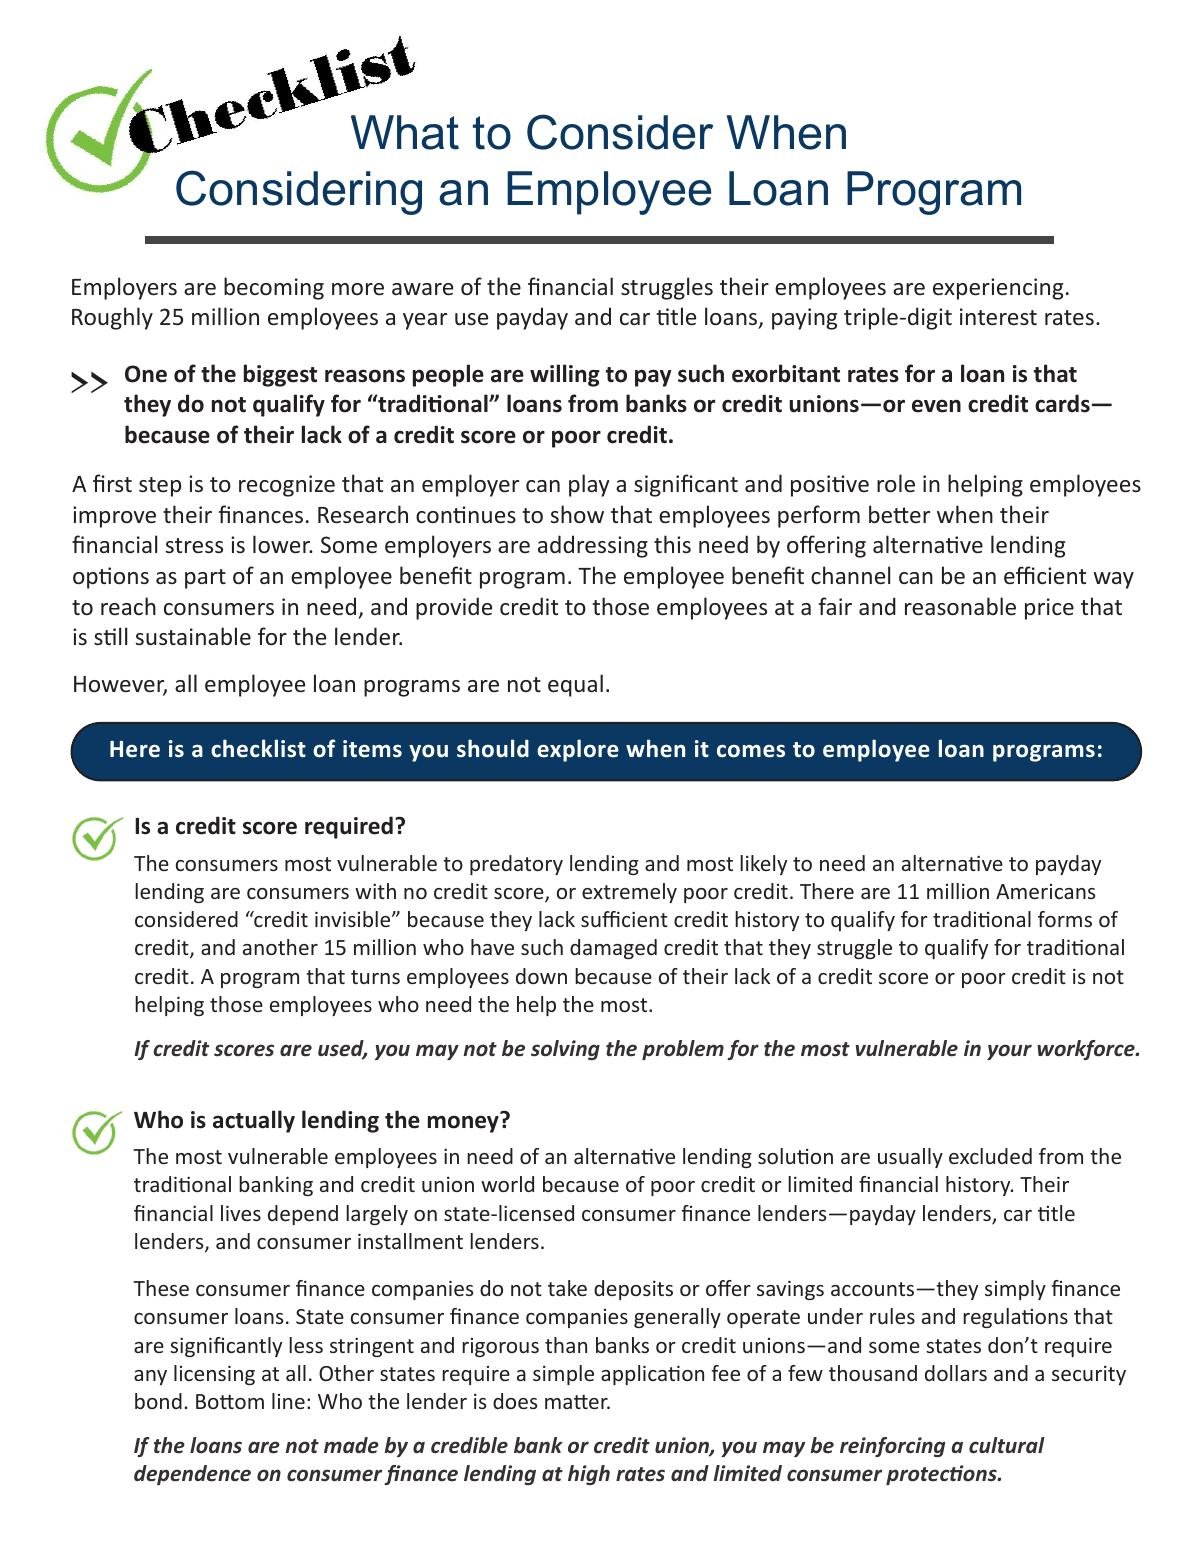 What to Consider When Considering an Employee Loan Program